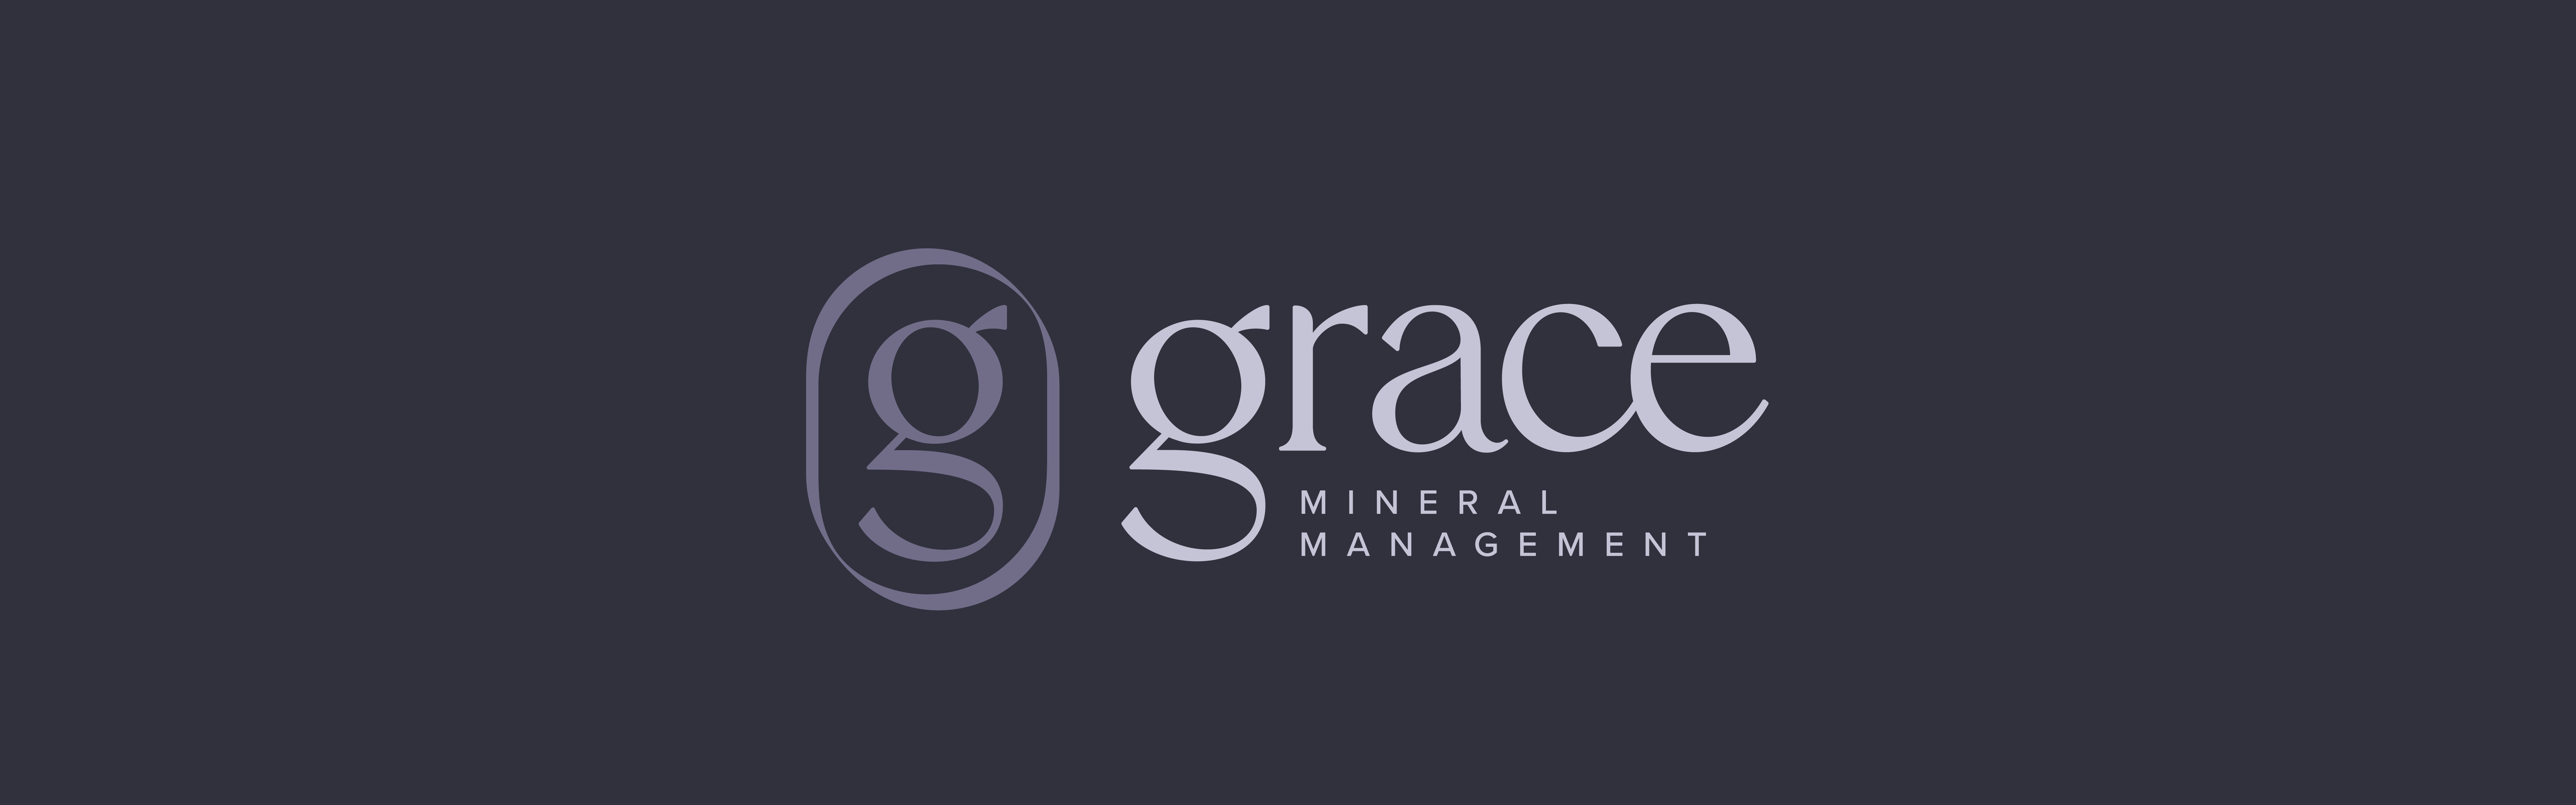 The image displays the logo for "Grace Mineral Management" set against a dark blue background. The logo consists of a stylized letter "G" followed by the word "Grace" in lowercase c.